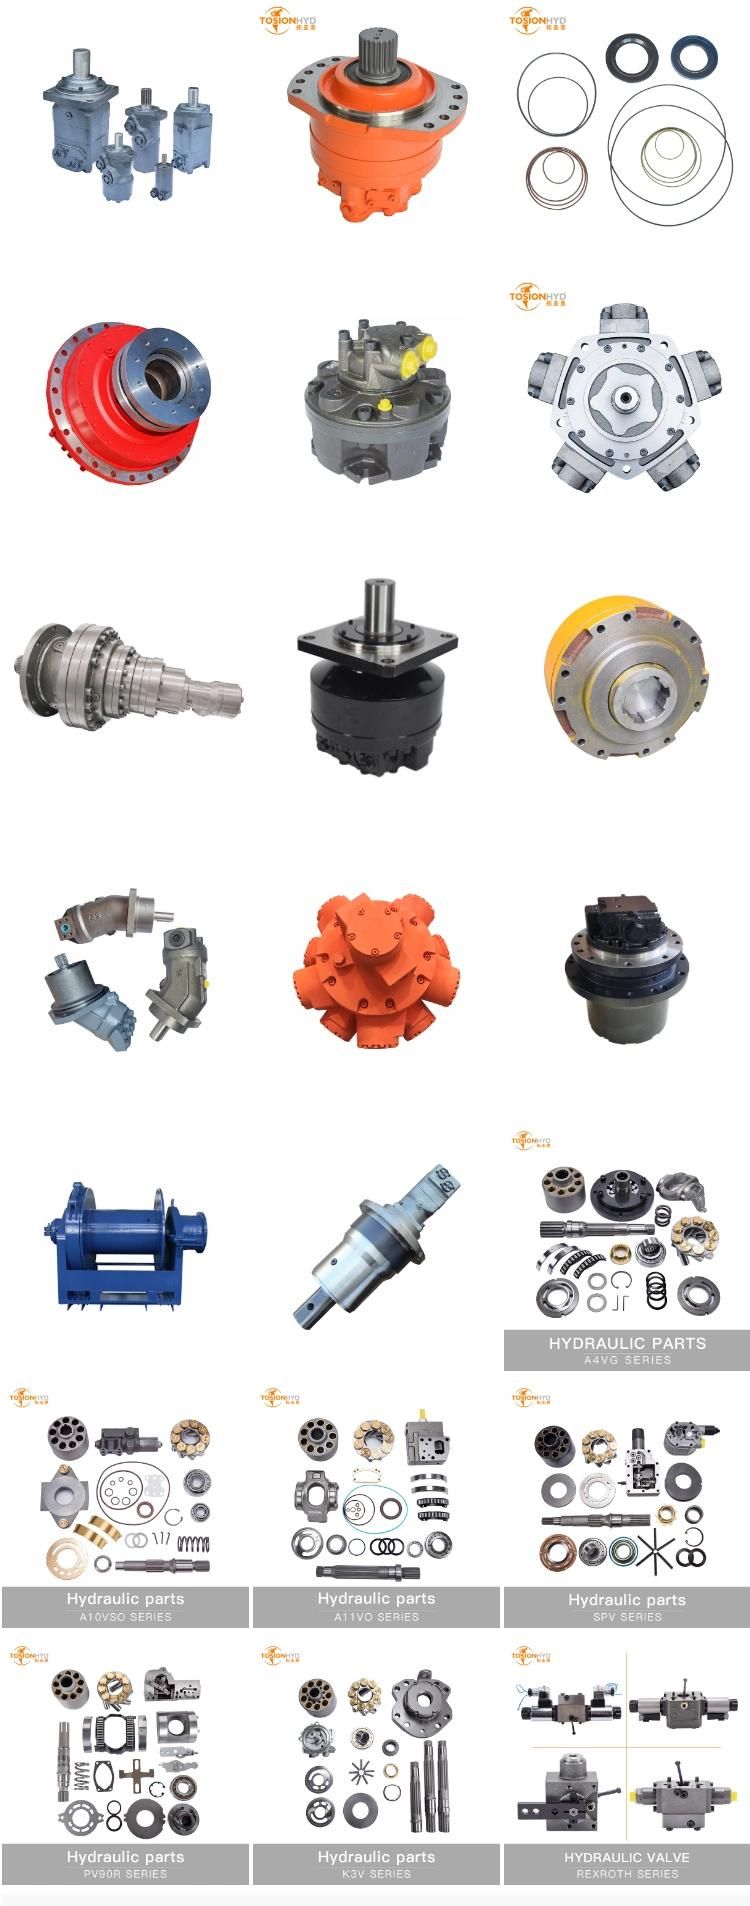 A7vo 107 Hydraulic Pump Parts with Rexroth Spare Repair Kits